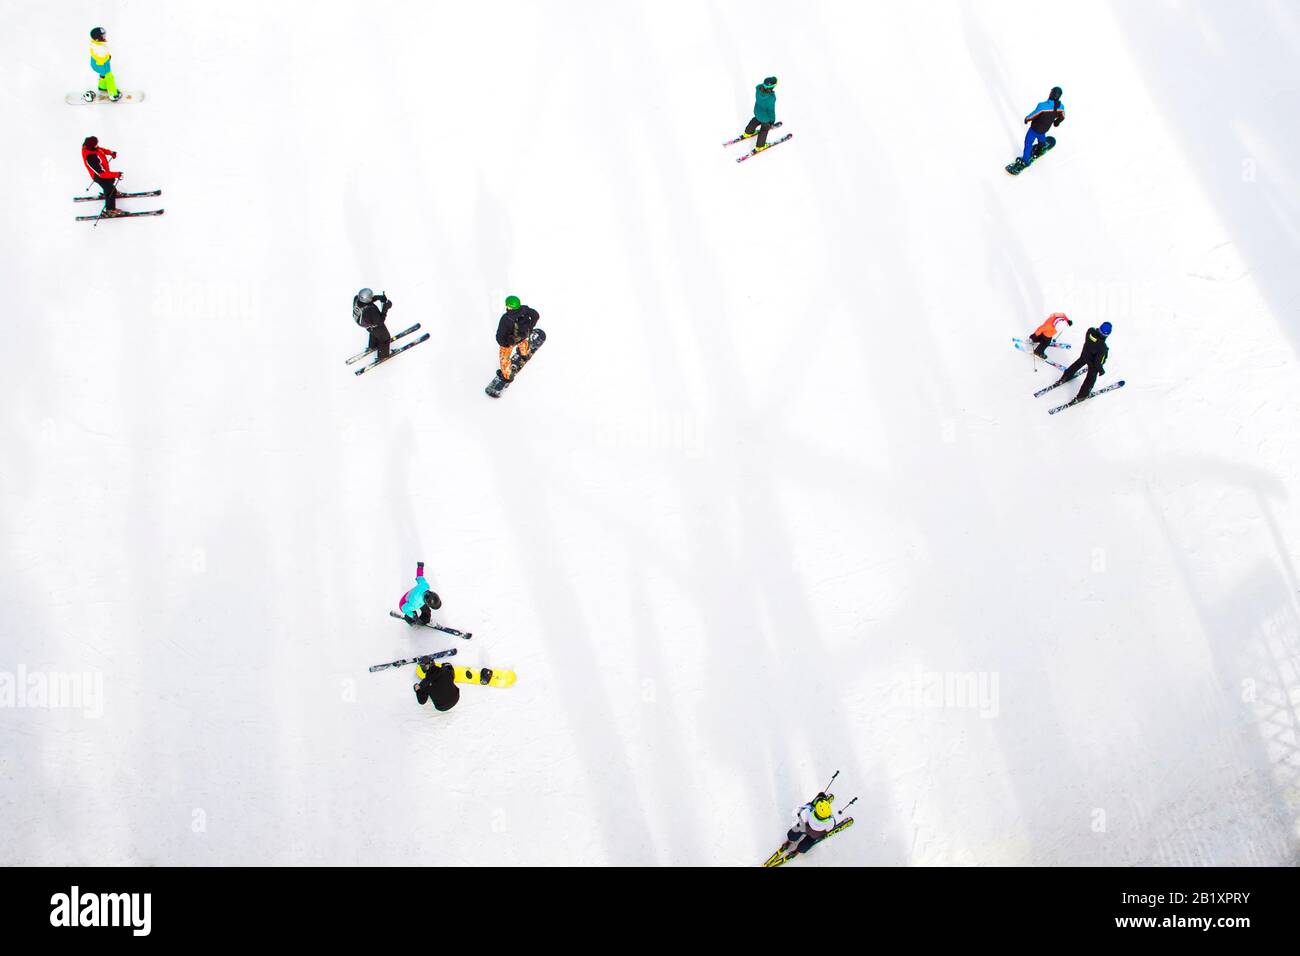 Top view of skiers and snowboarders riding on winter mountain. Stock Photo